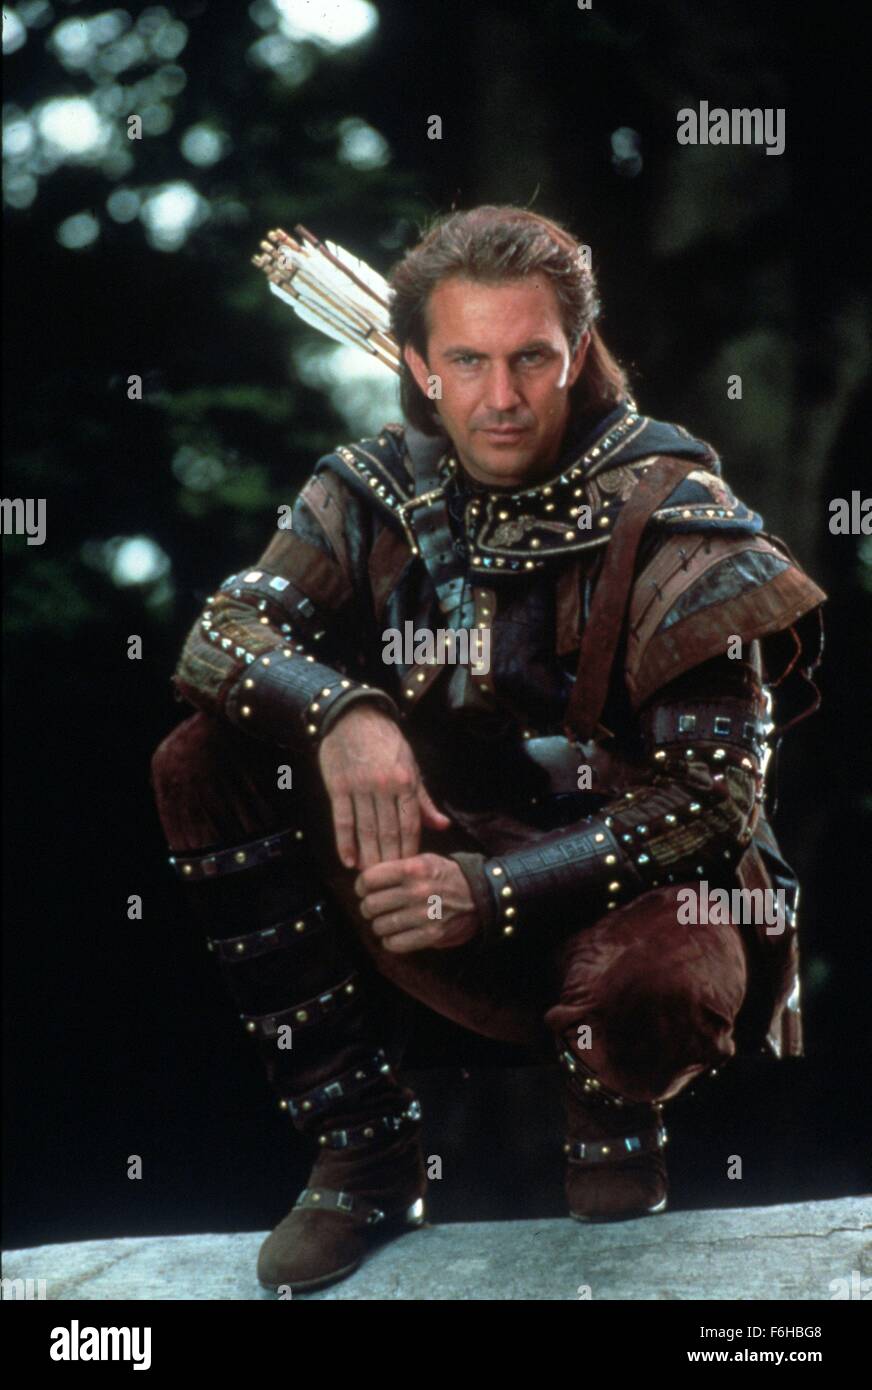 1991, Film Title: ROBIN HOOD: PRINCE OF THIEVES, Director: KEVIN REYNOLDS, Studio: WARNER, Pictured: 1991, CHARACTER, KEVIN COSTNER, ROBIN HOOD, COSTUME, OUTFIT - LEATHER, ARROWS, CROUCHING, GOOD CHARACTER, FOREST. (Credit Image: SNAP) Stock Photo